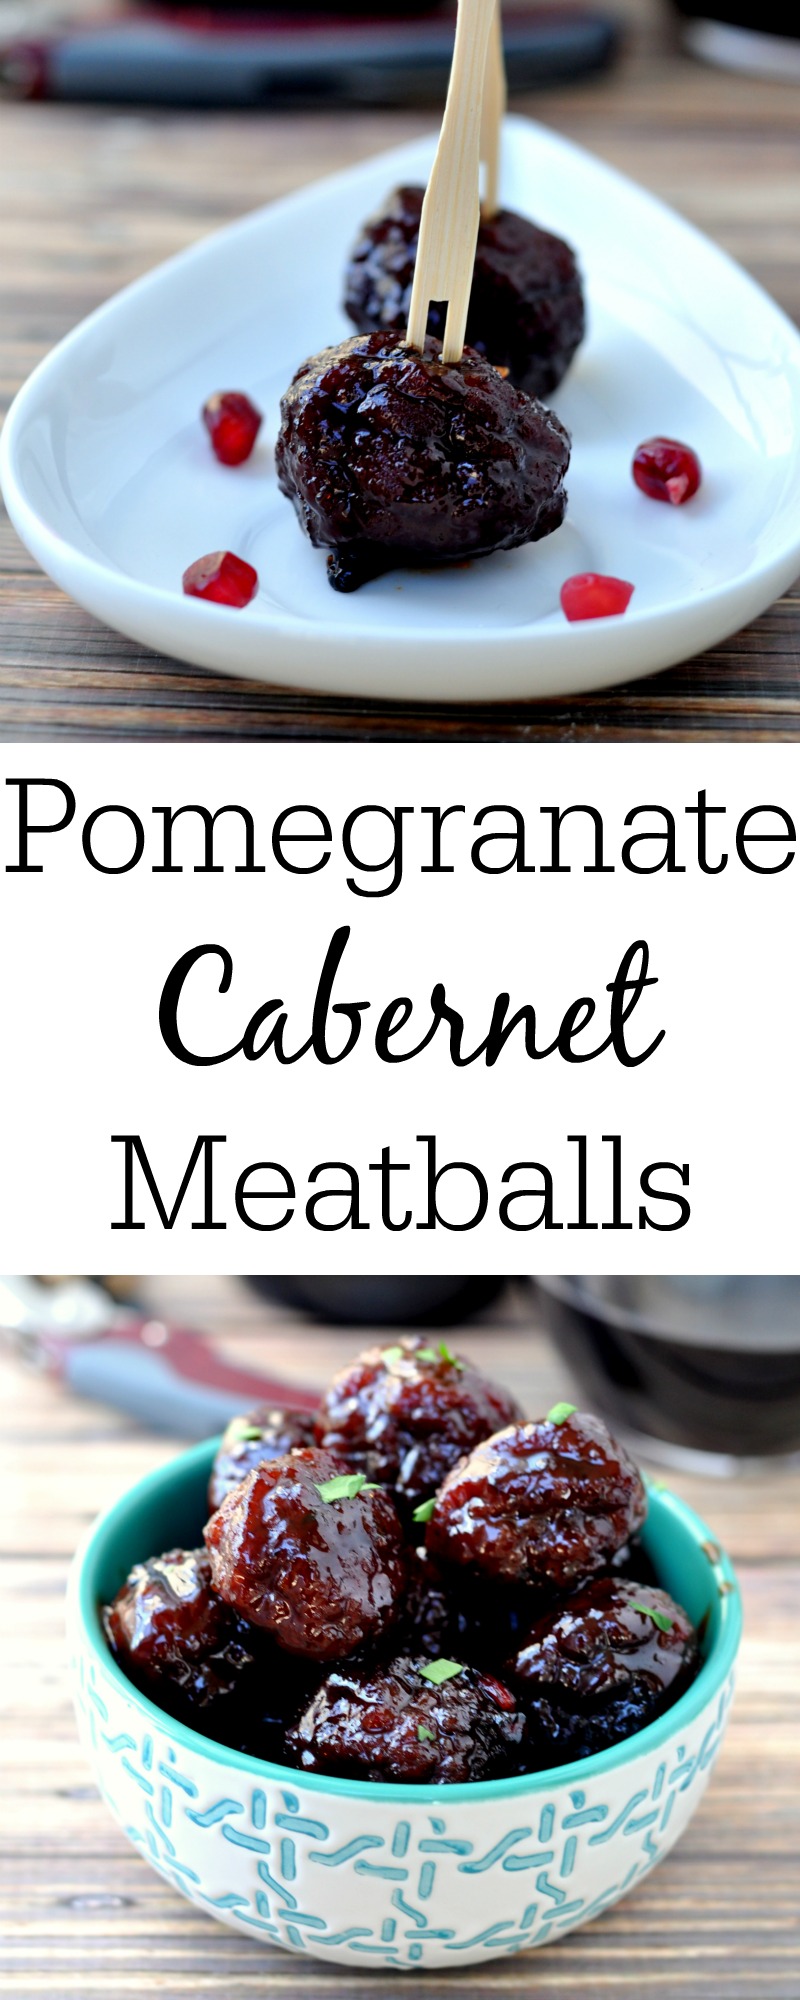 Pomegranate Cabernet Meatballs are the perfect bite sized appertizer for your next party...big or small...low key or fancy.